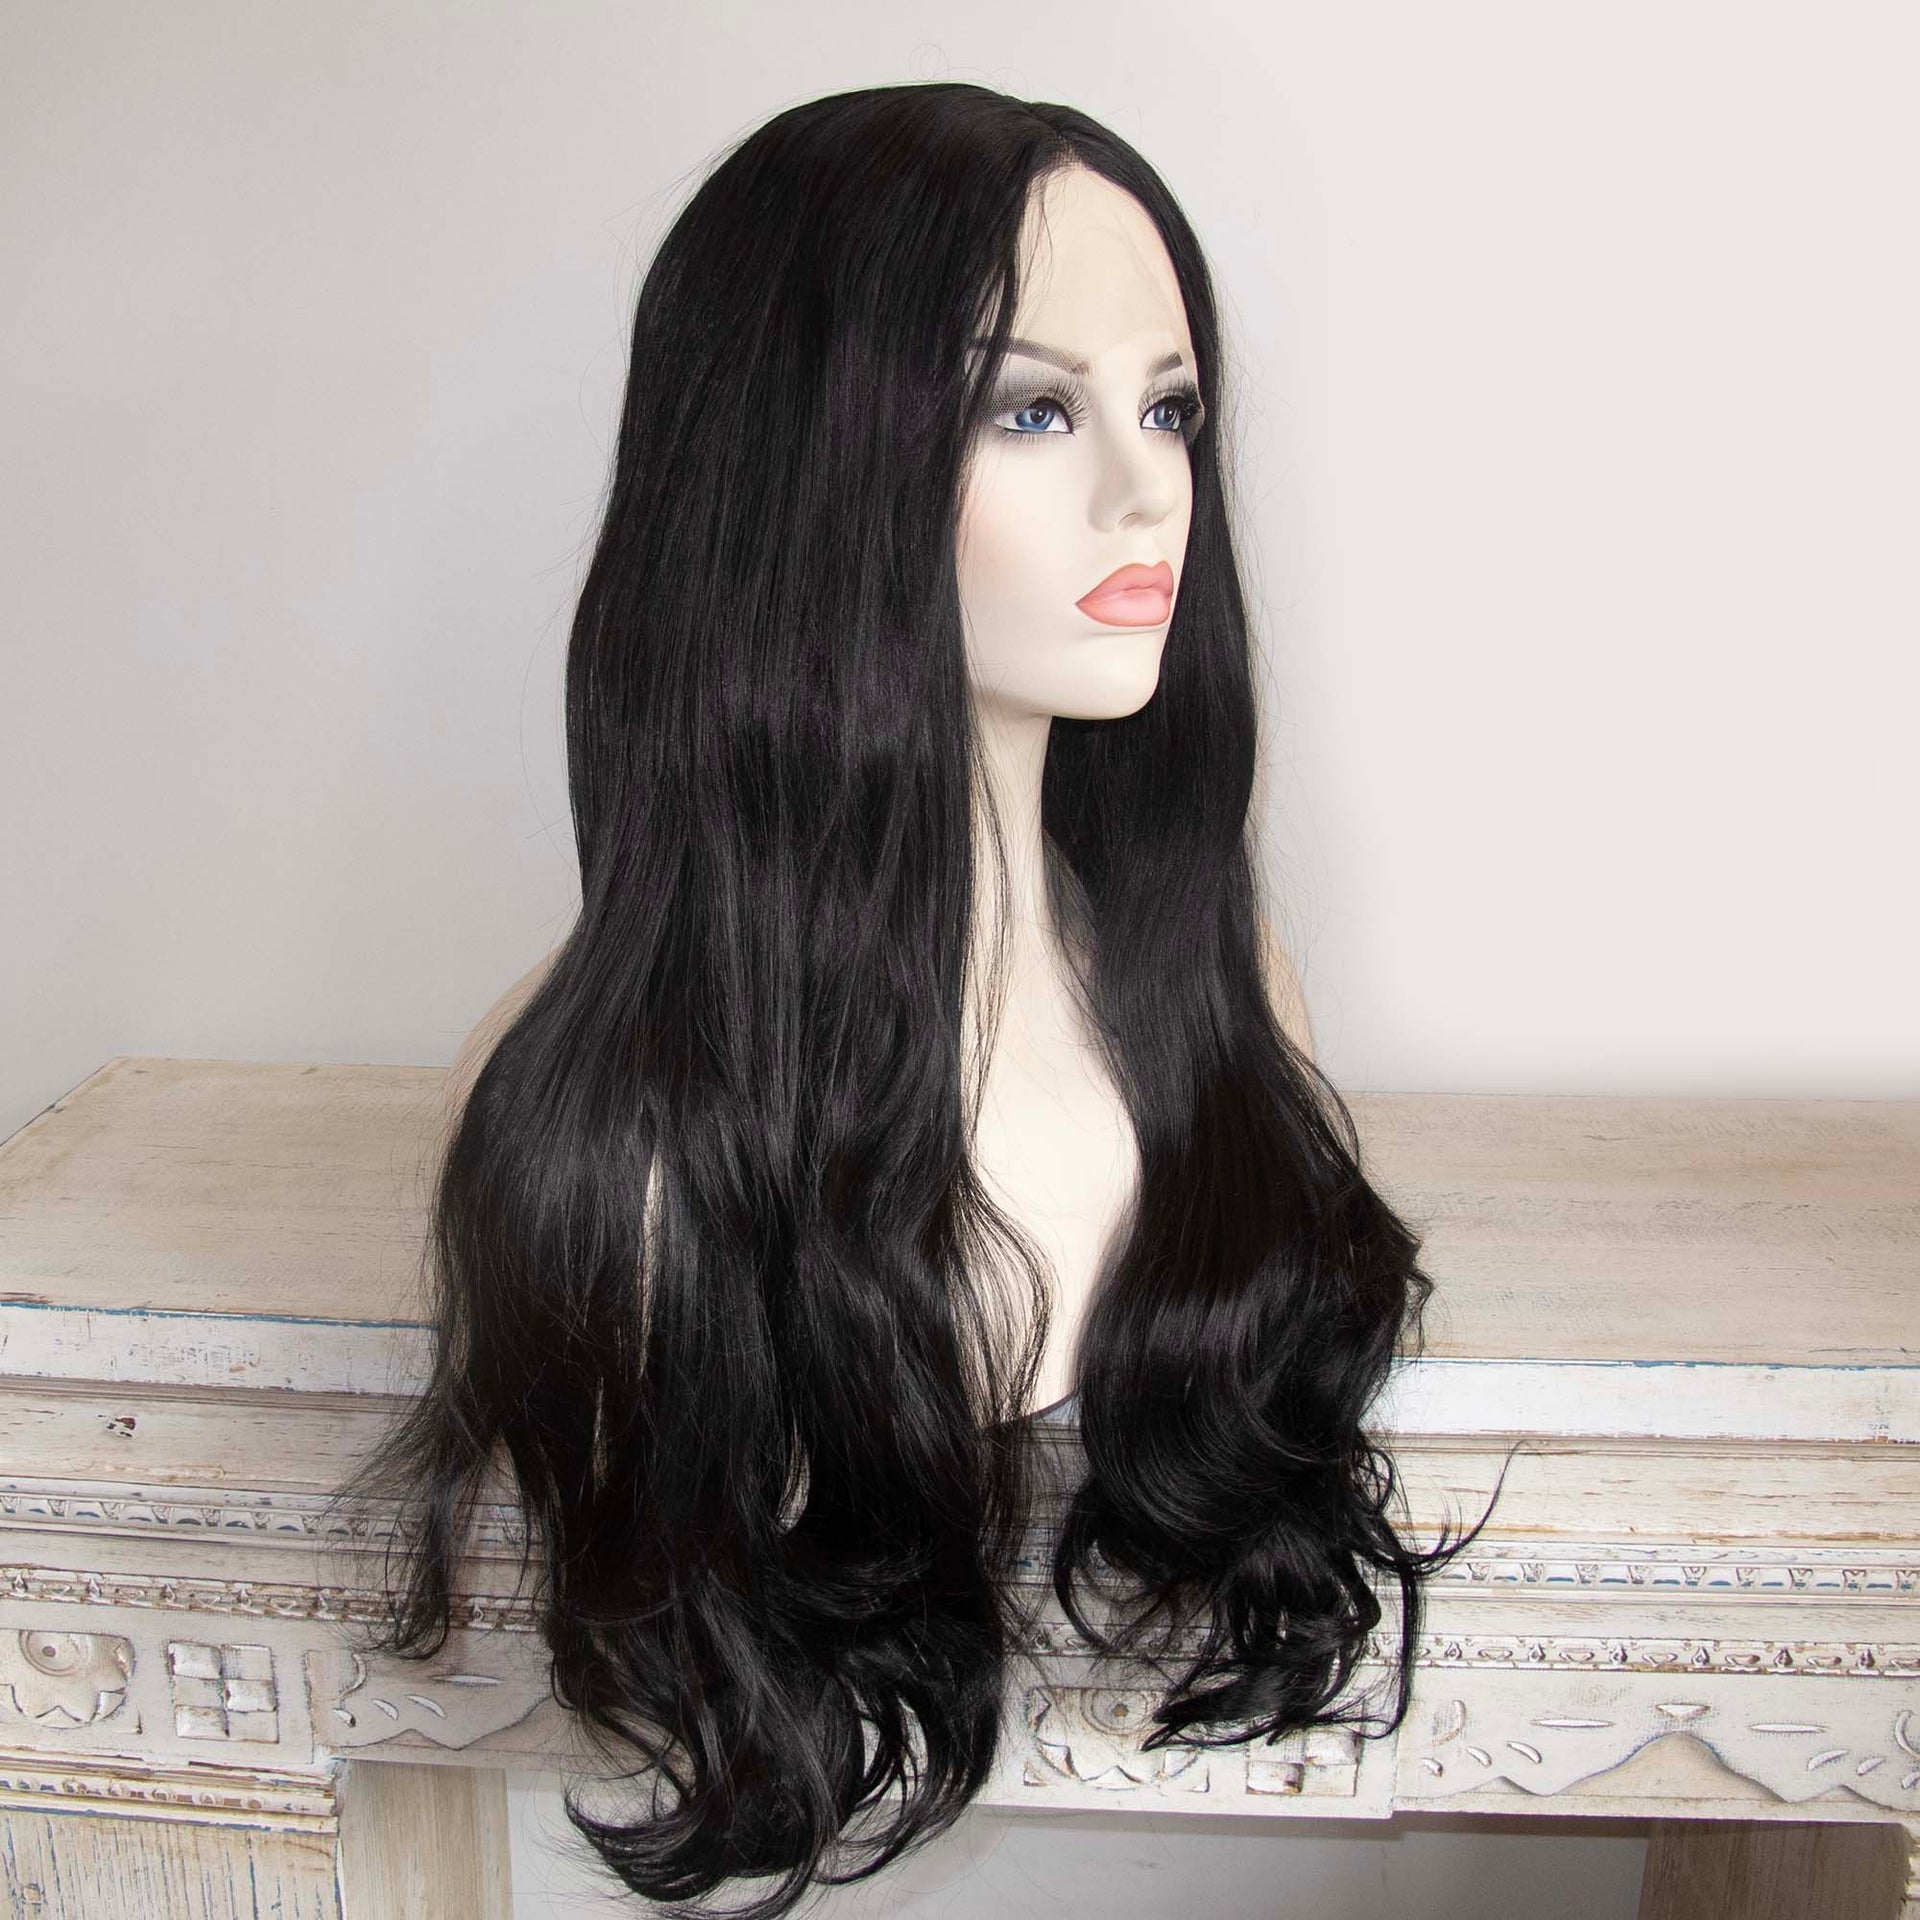 nevermindyrhead Women Black Lace Front Long Wavy Hair Thick Middle Part Wig 24 Inches